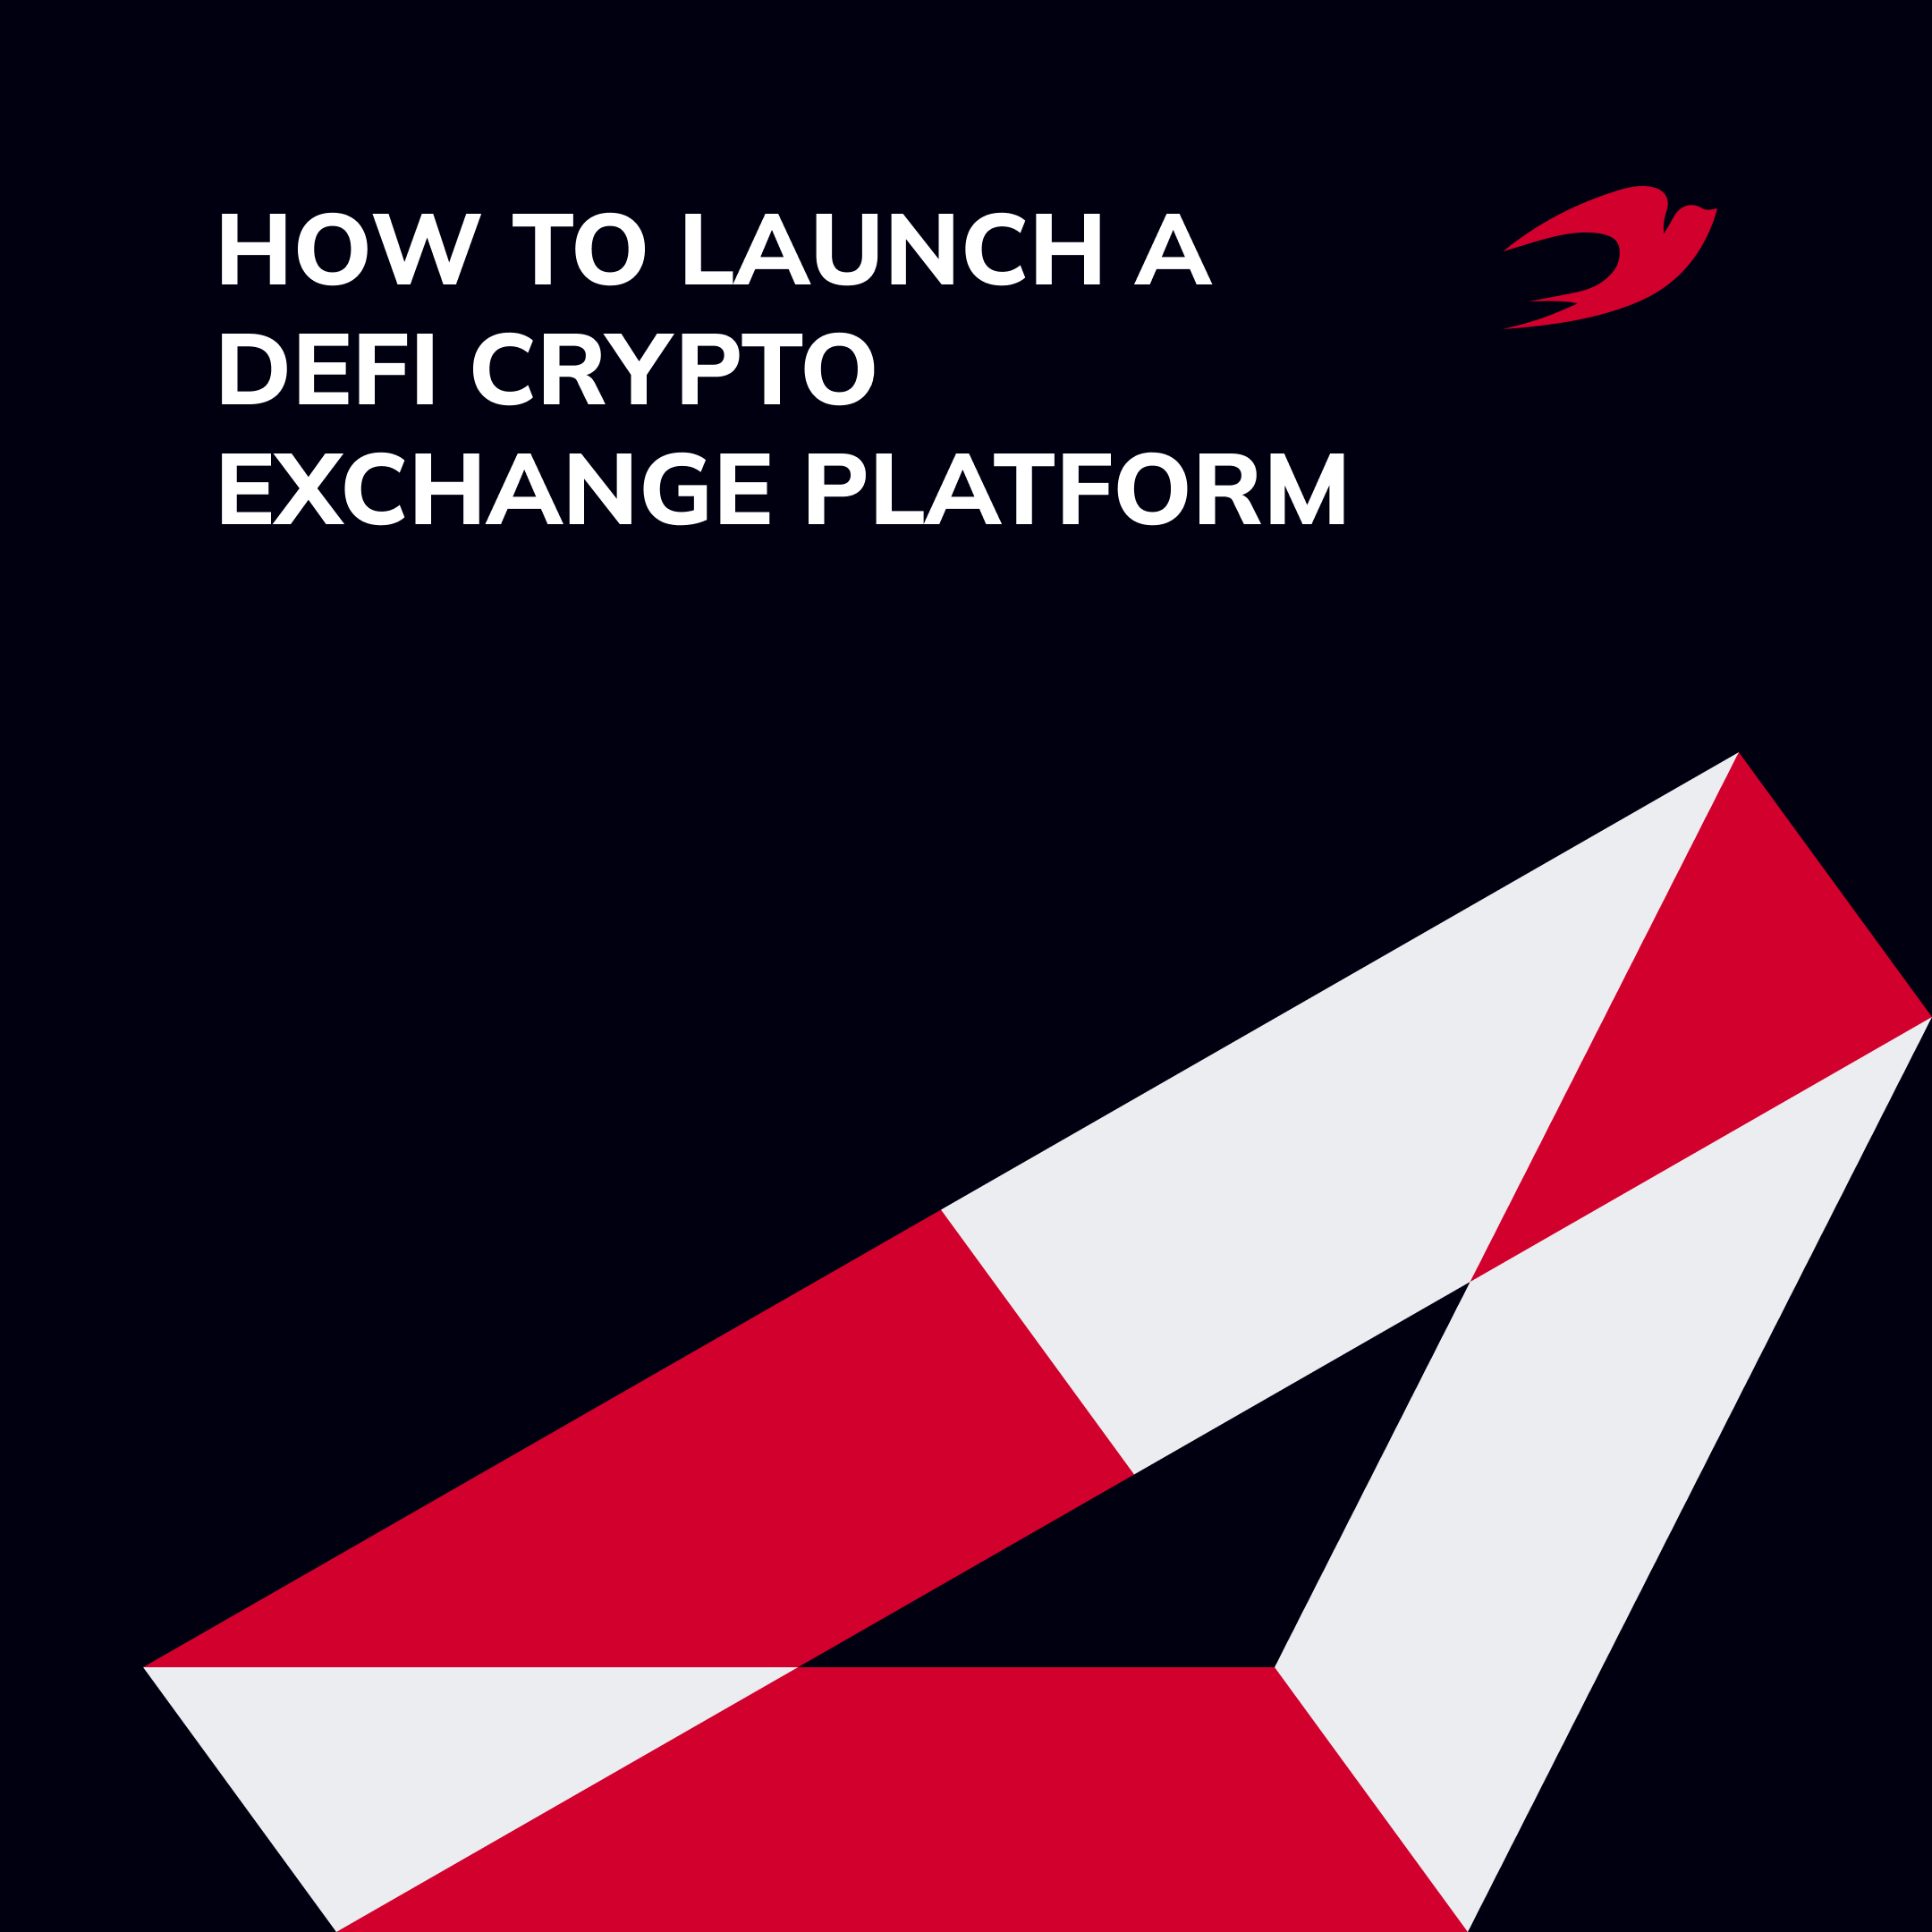 How to Launch a DeFi Crypto Exchange Platform